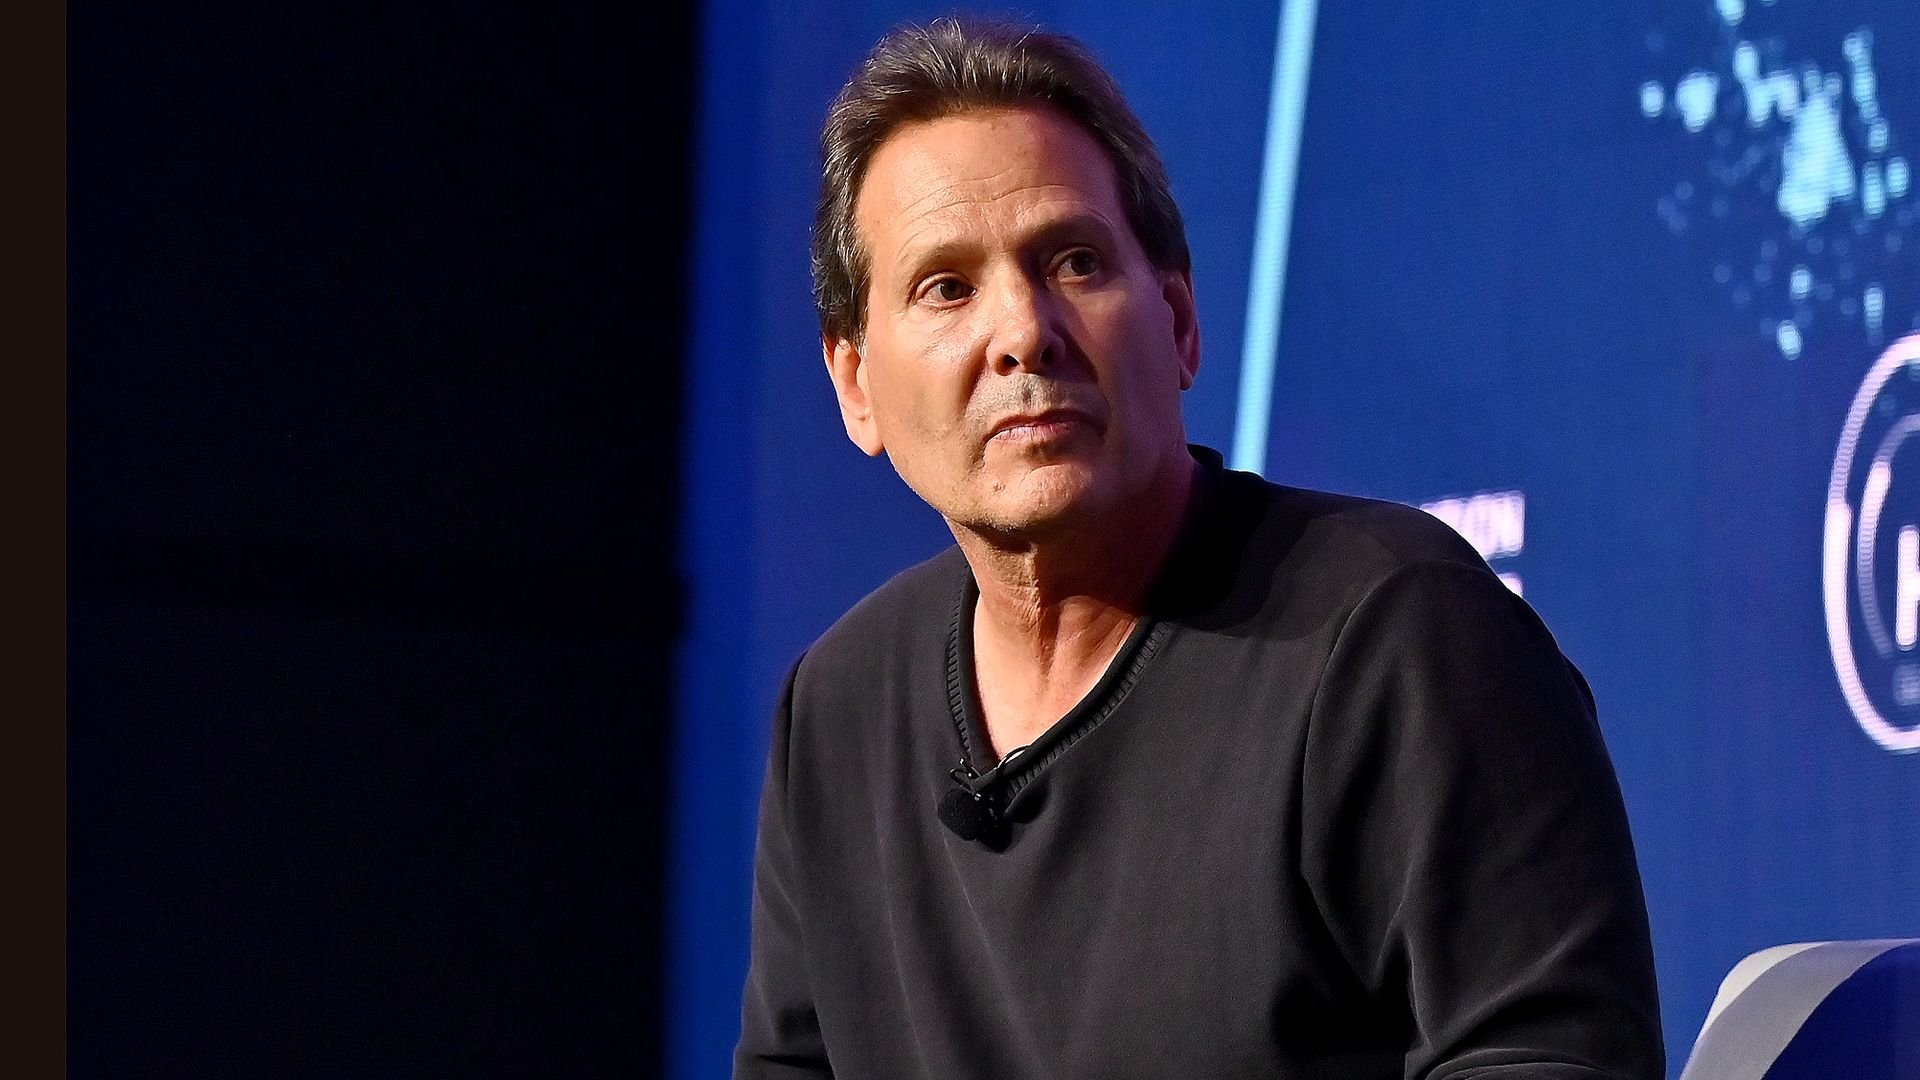 PayPal to lay off 2,000 employees